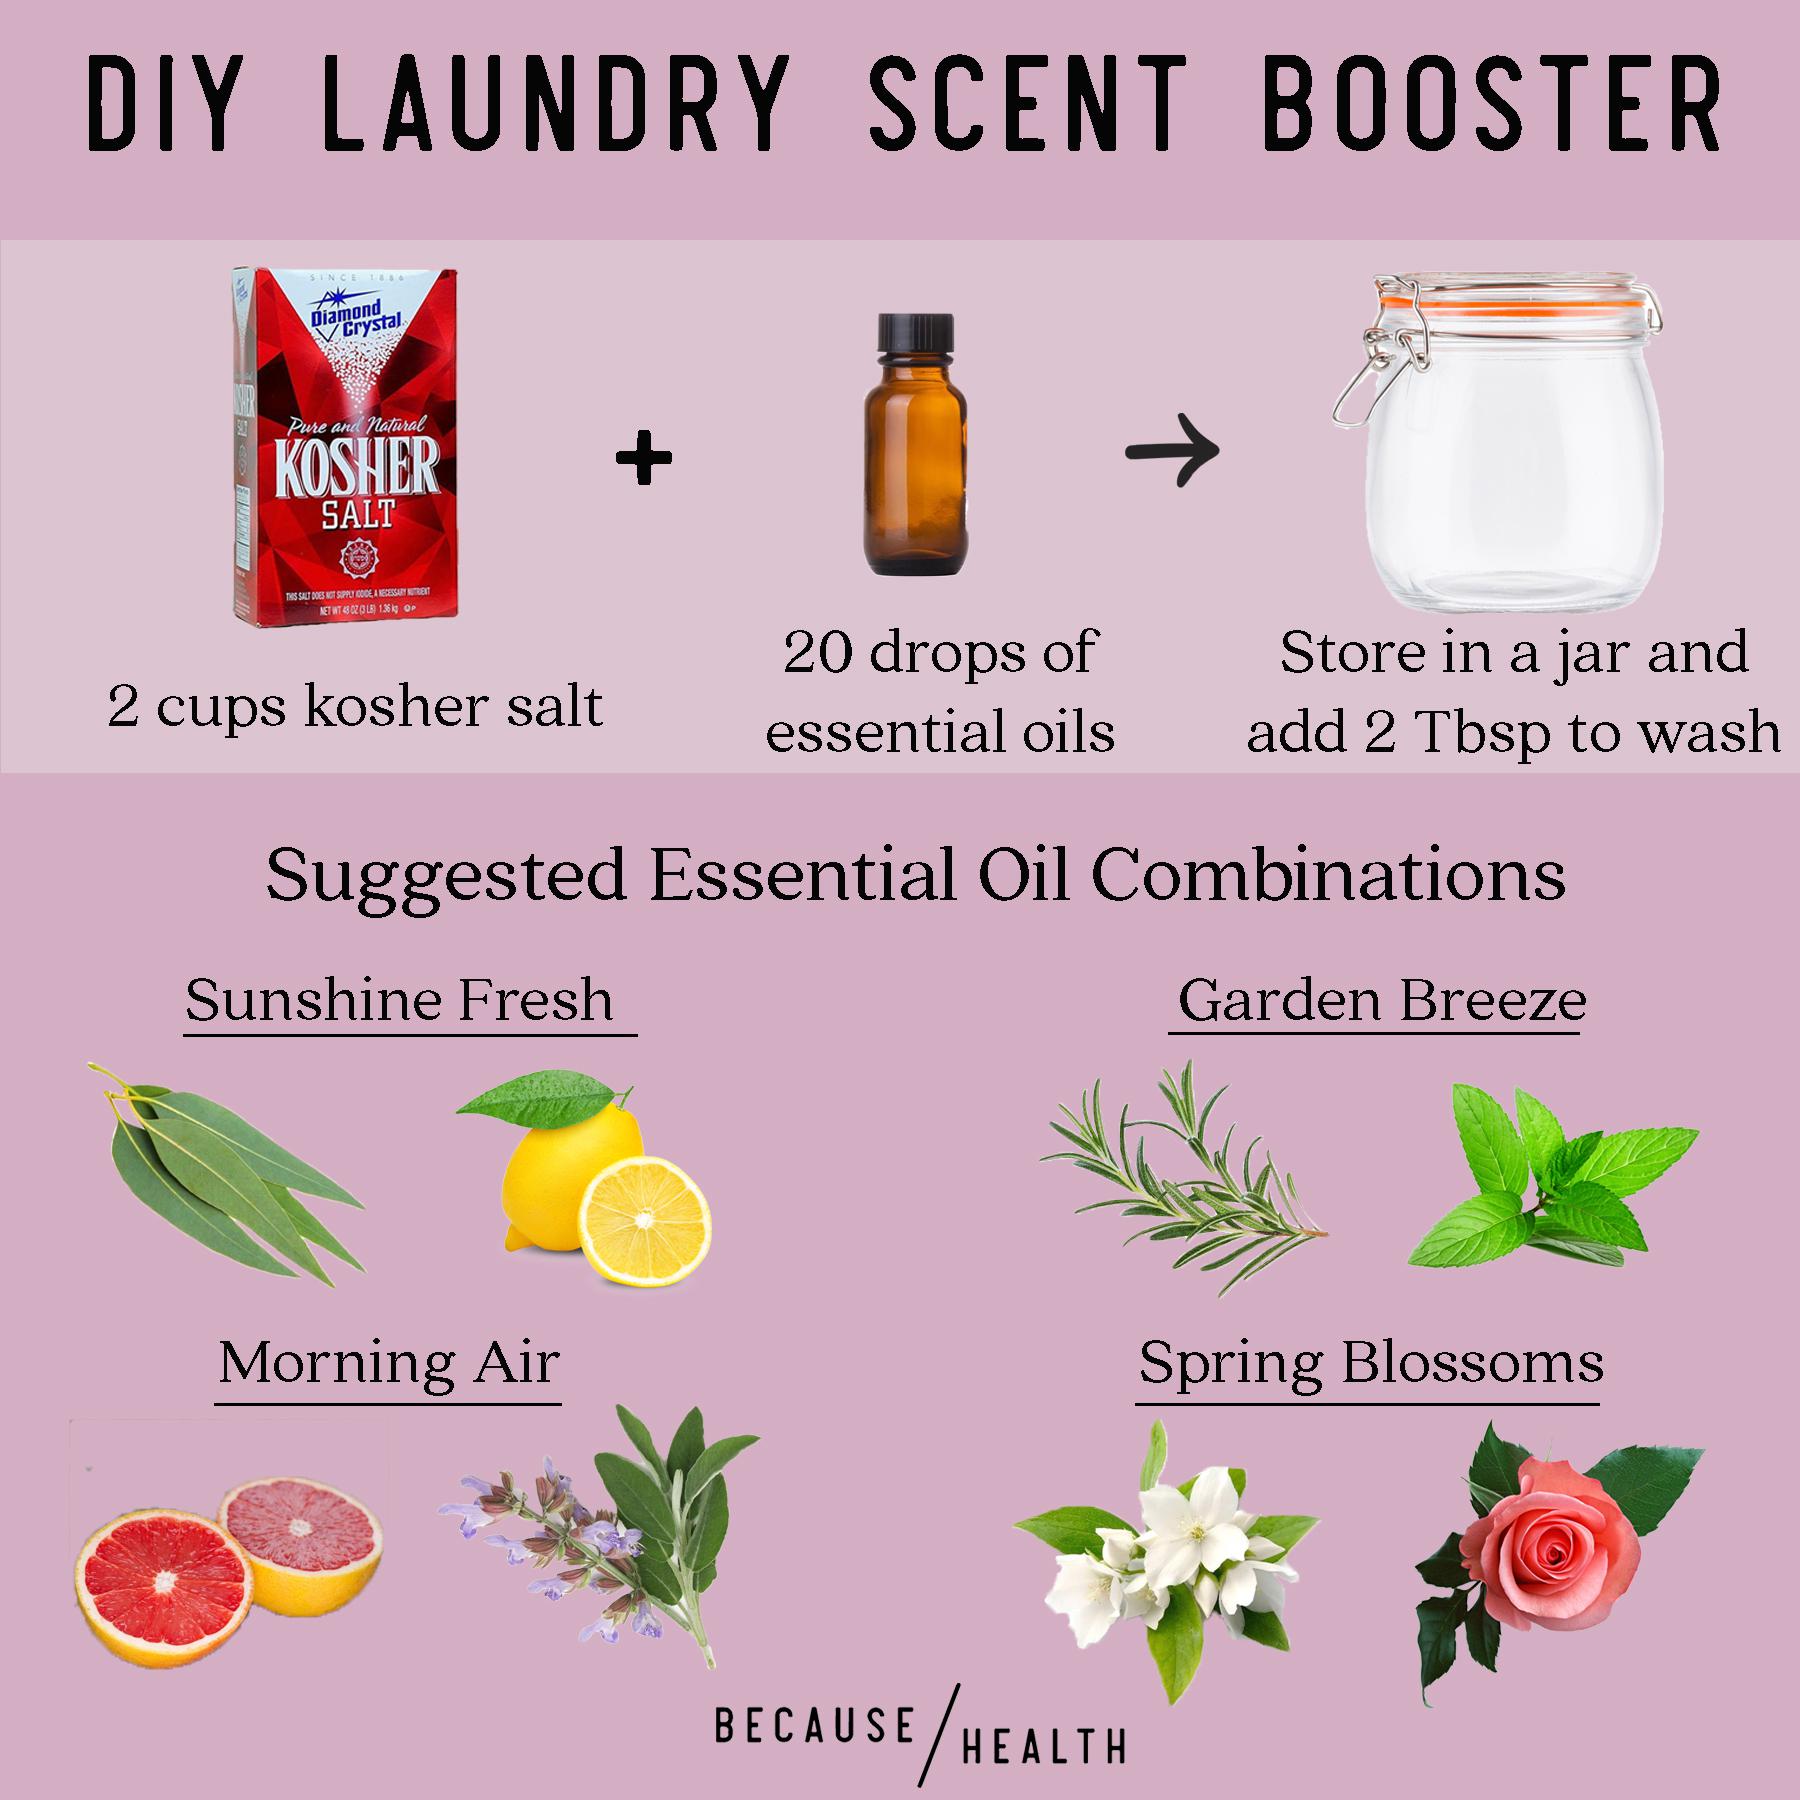 How to Make an All-Natural Laundry Scent Booster - Too Much Love